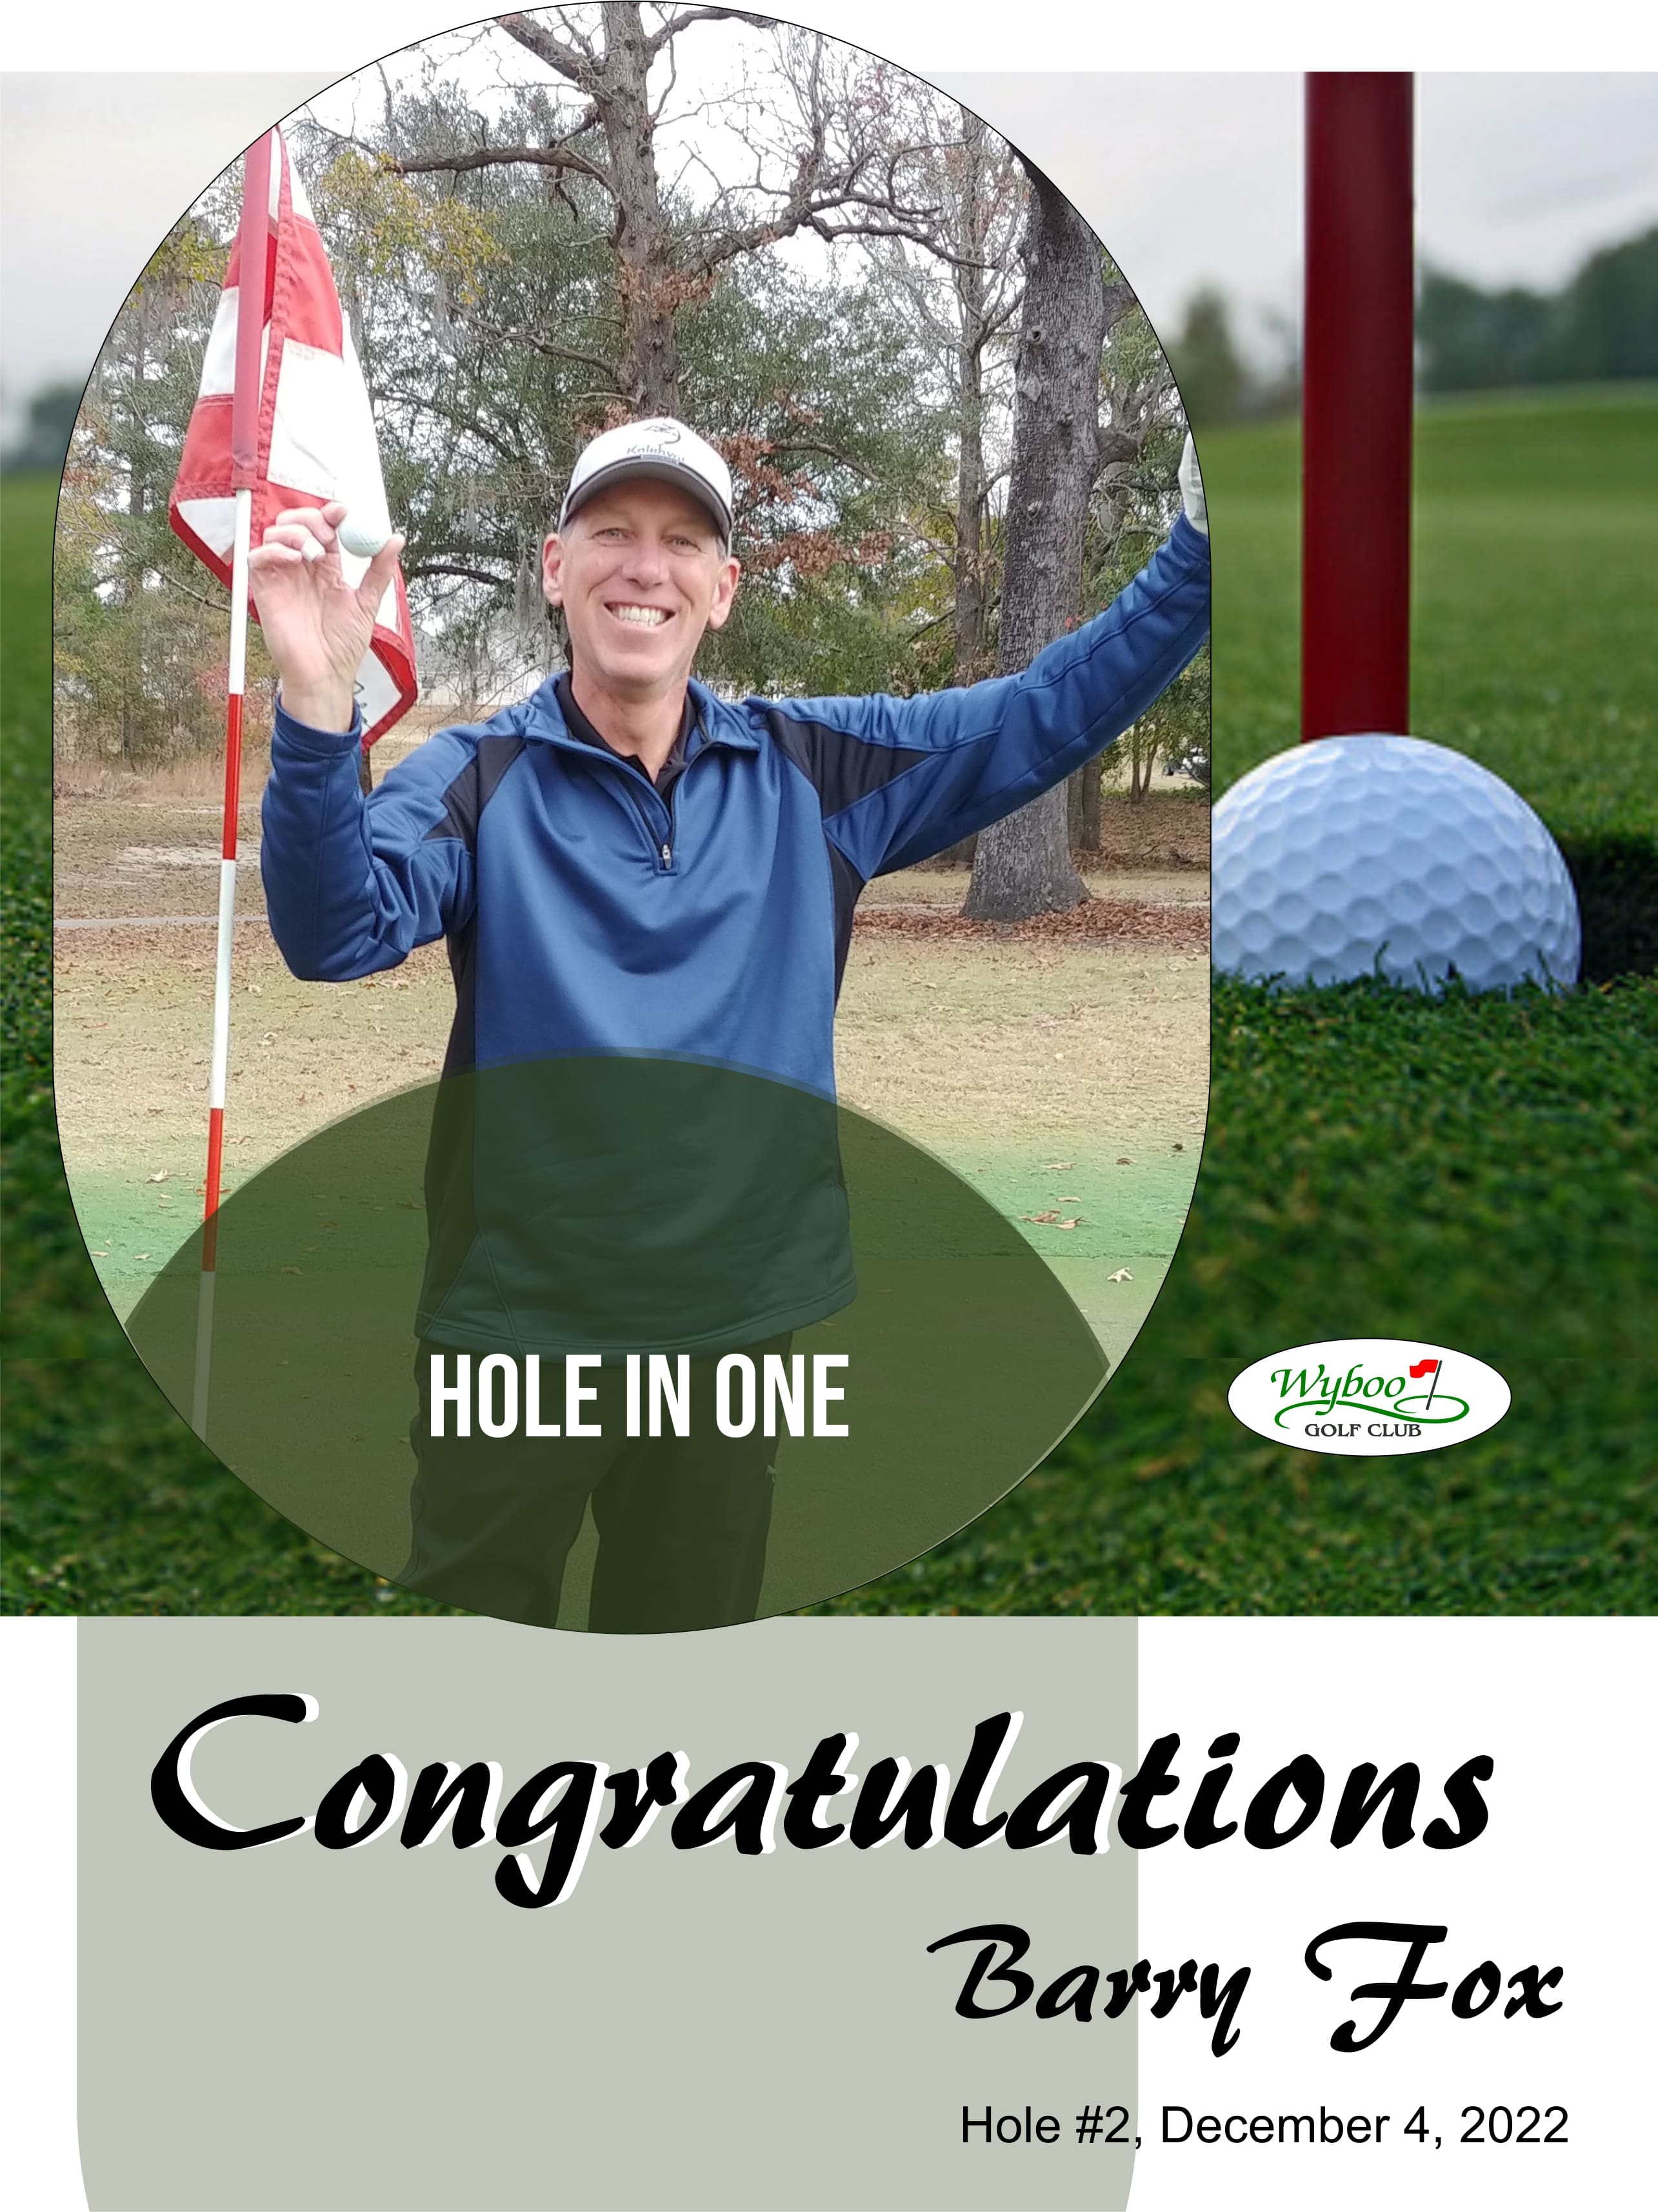 Hole in One Announcement Barry Fox 120422 min